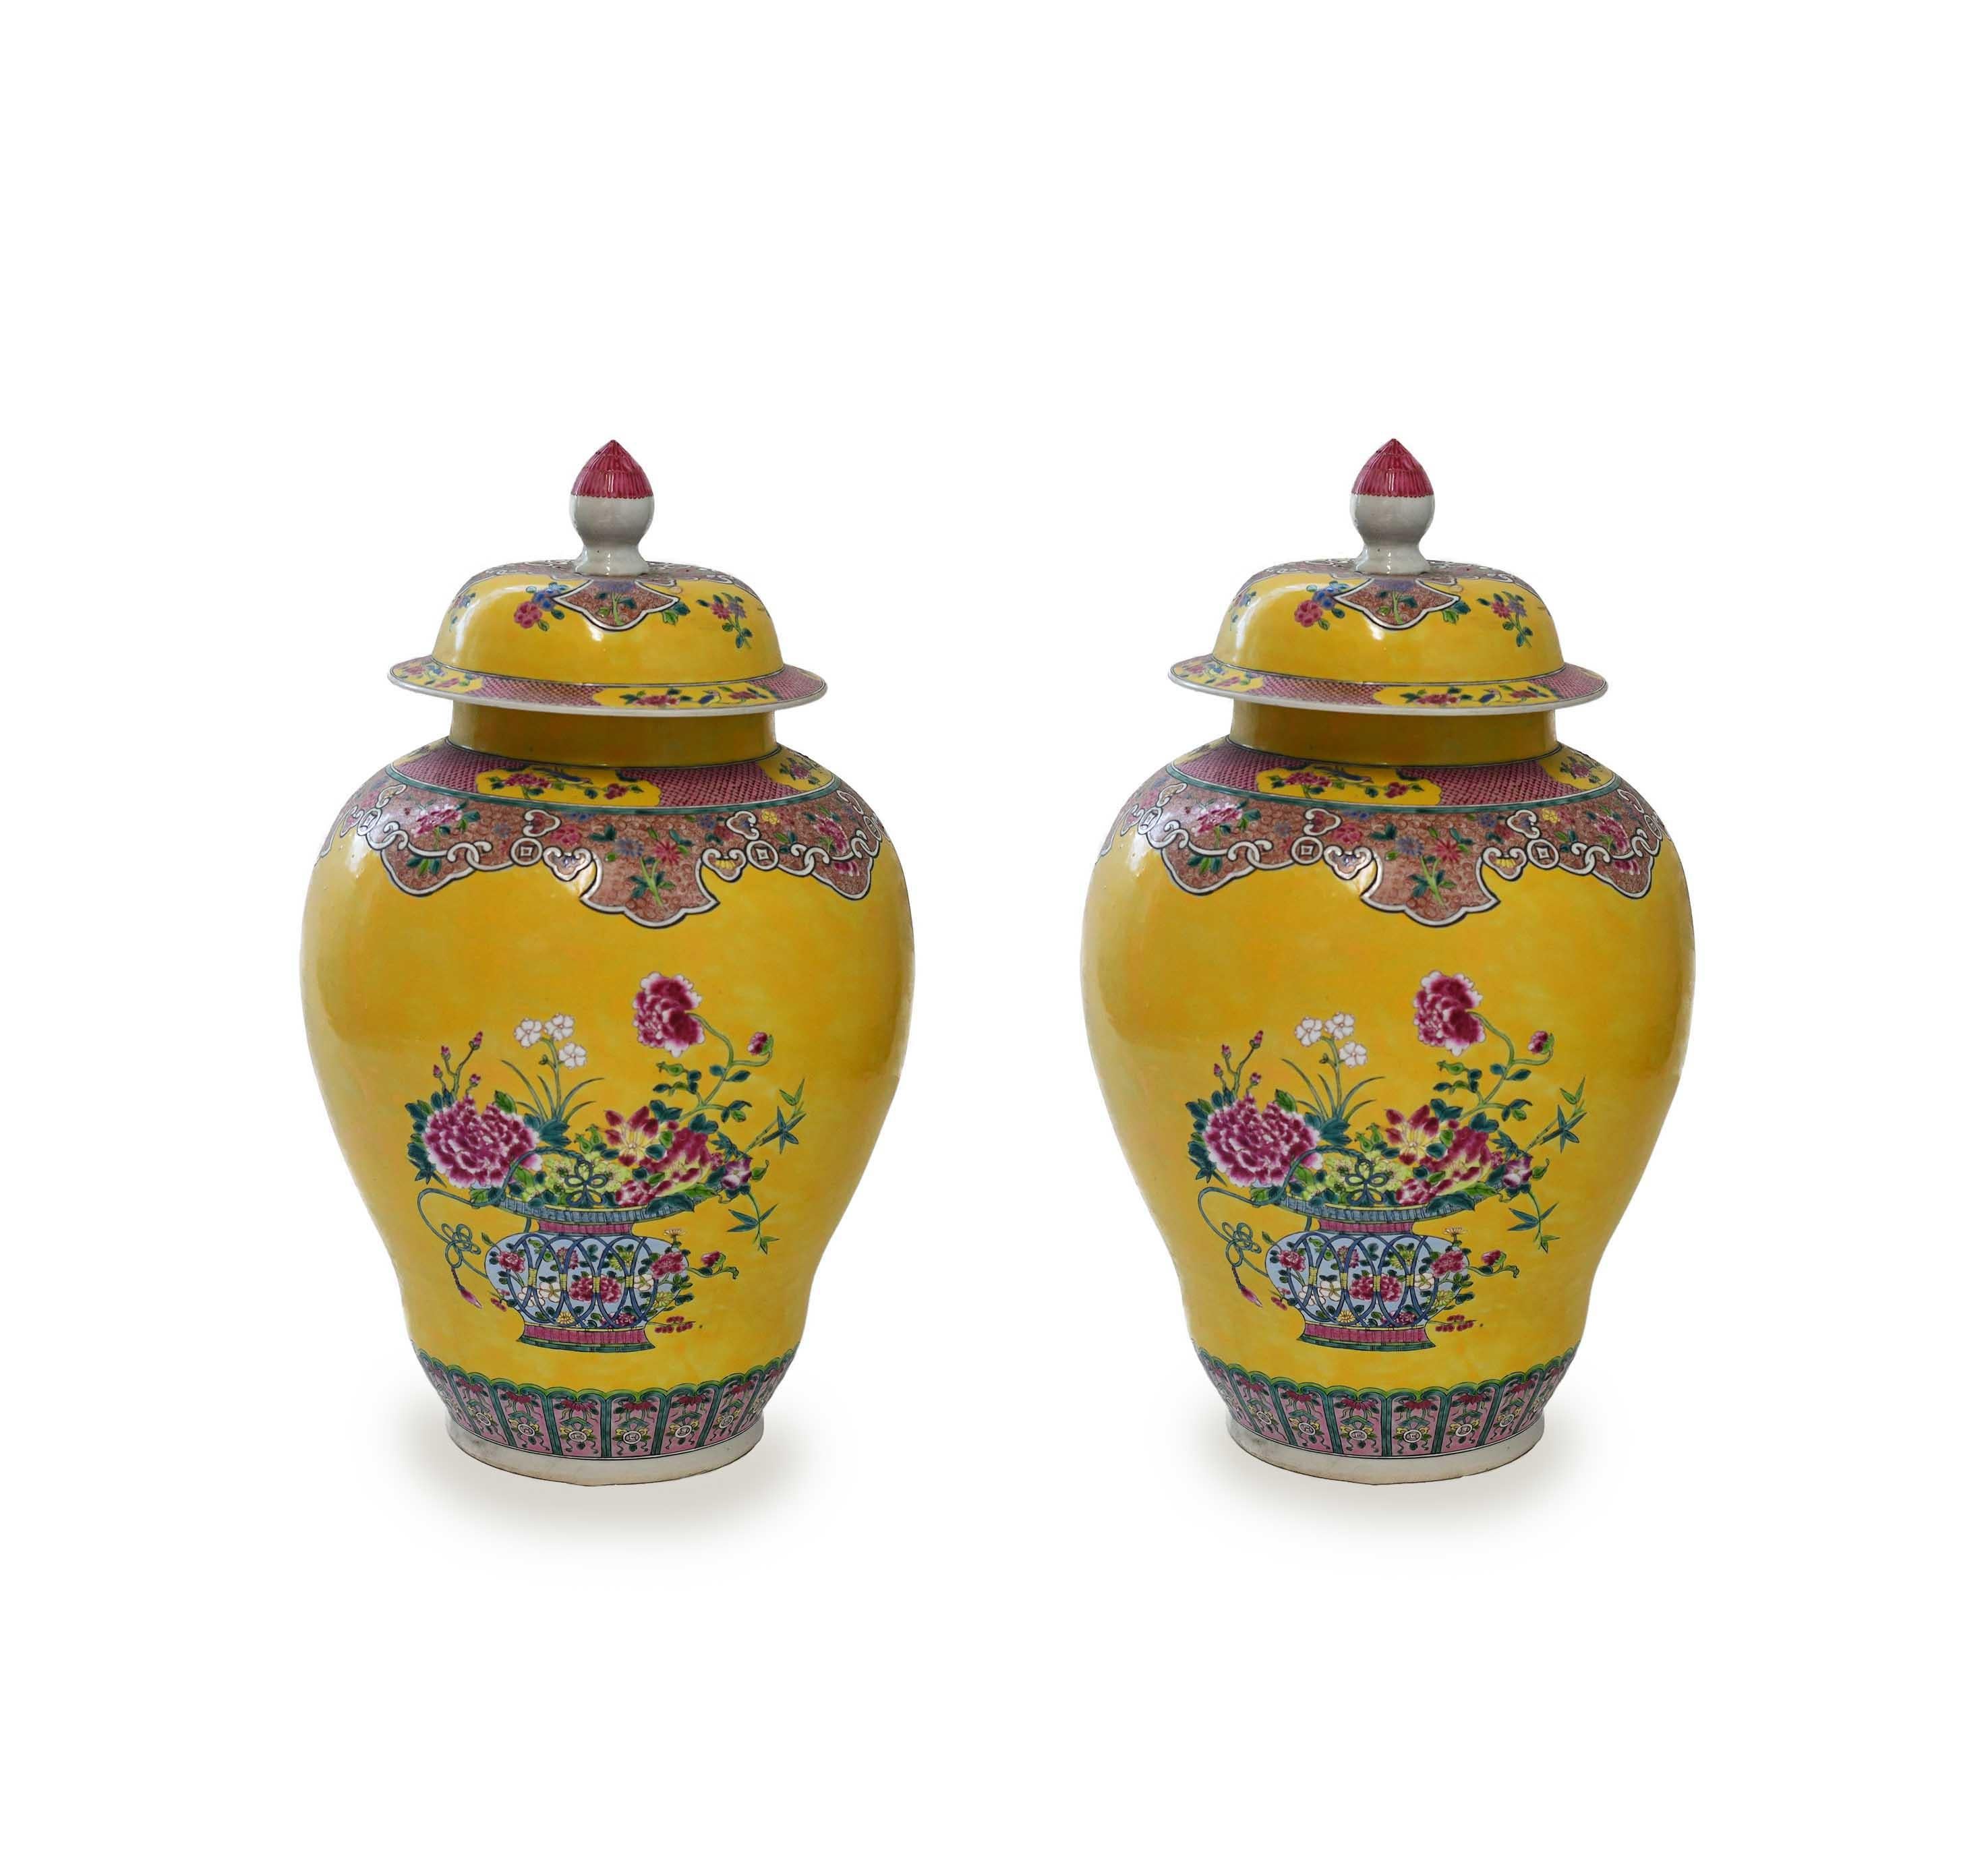 Fine painted porcelain vases with flowers bloom decoration.
The bottom of the porcelain is 8in/D.